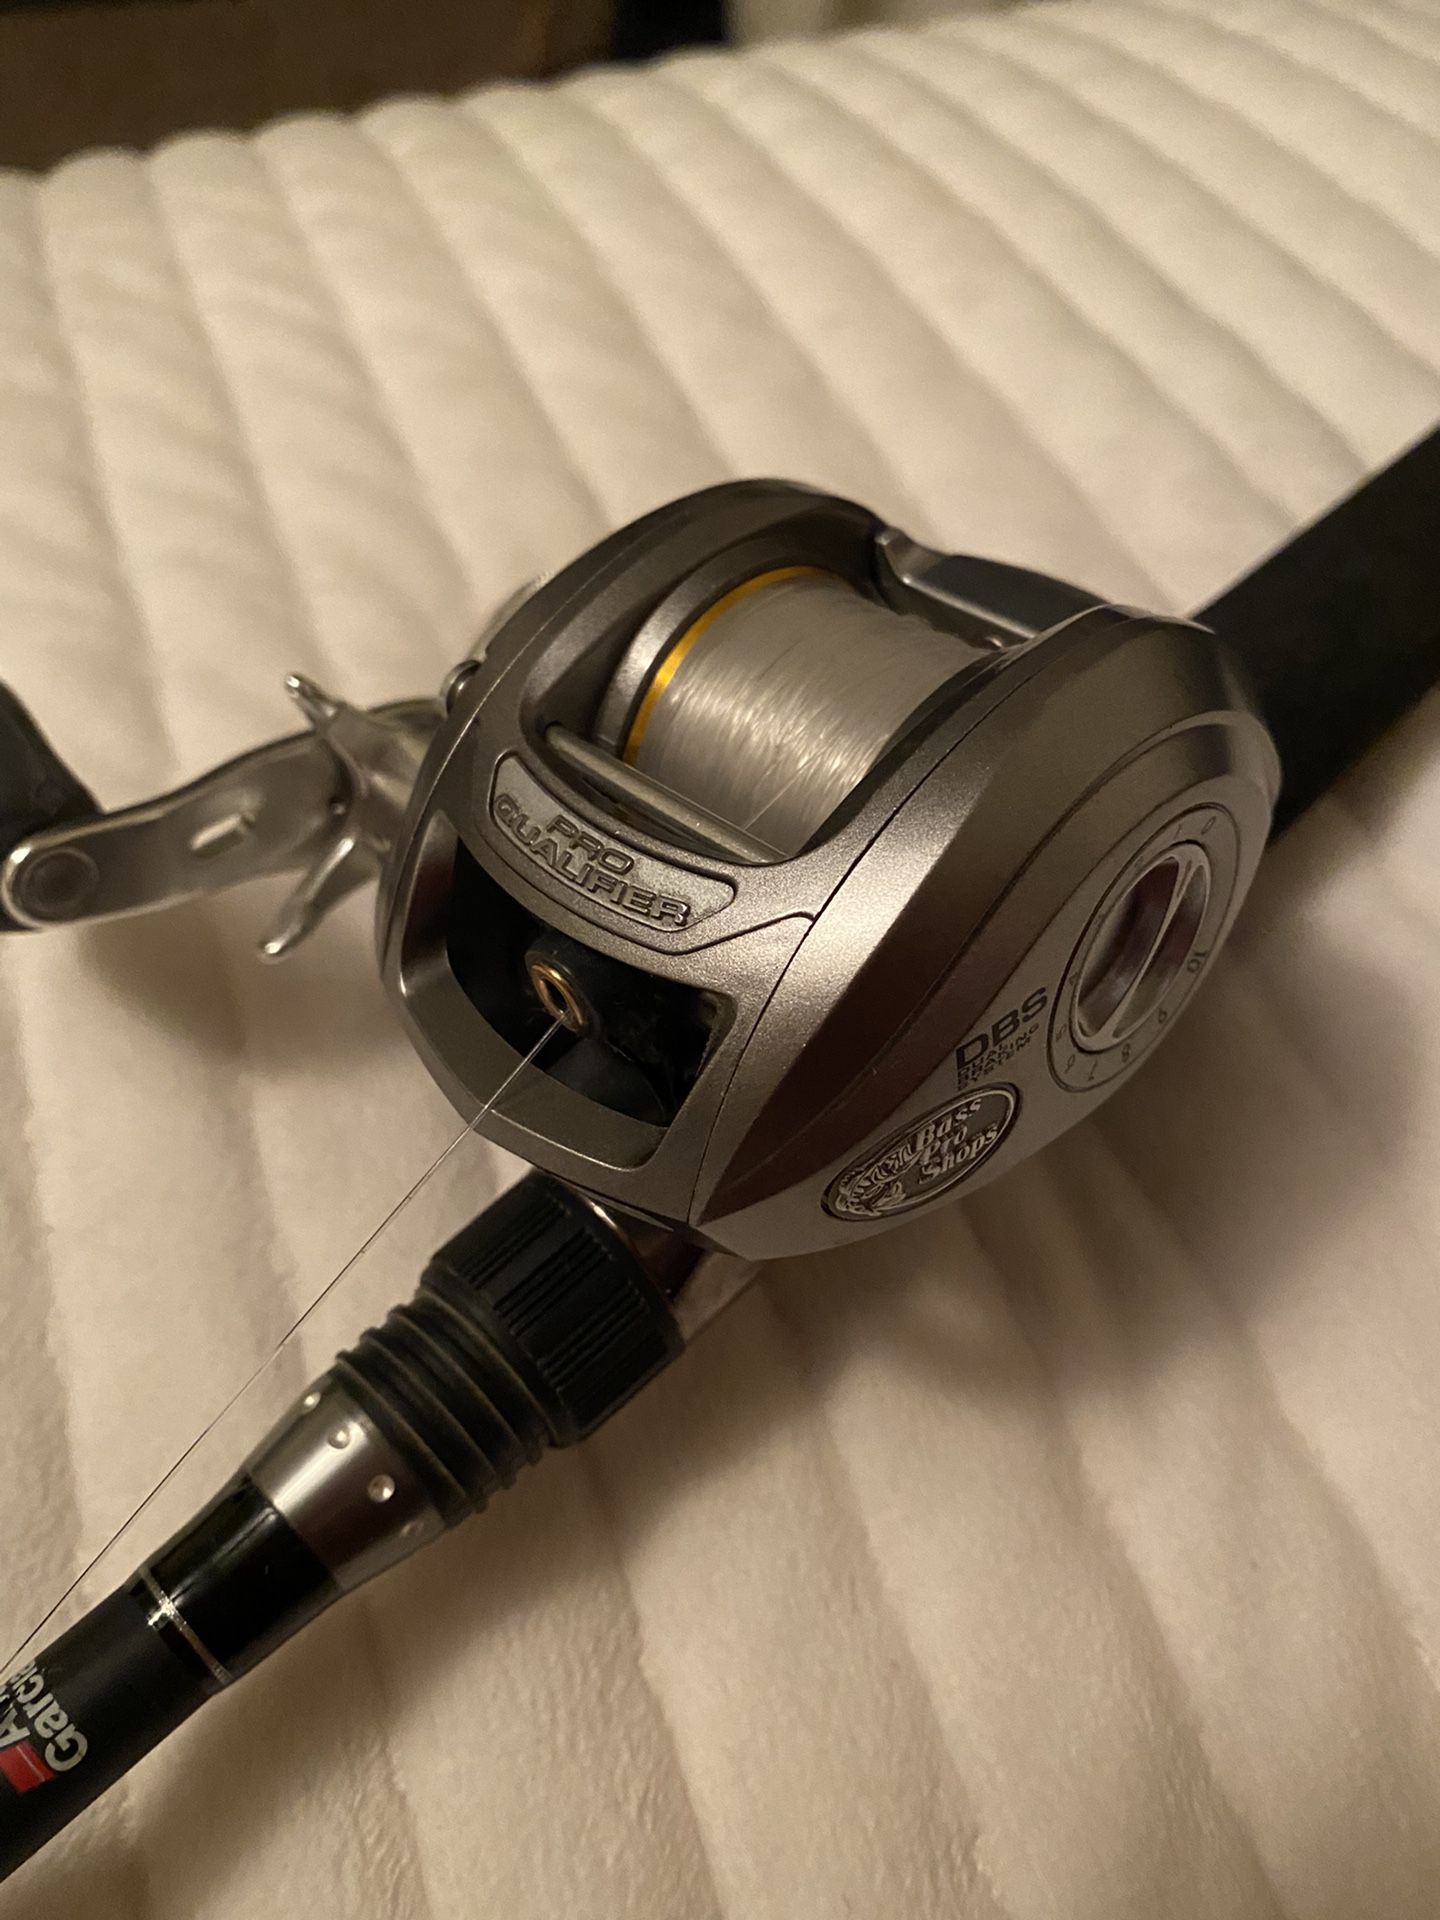 Fishing Rod/reels Spinning+casting, Loomis, Shimano, And More for Sale in  Peoria, AZ - OfferUp